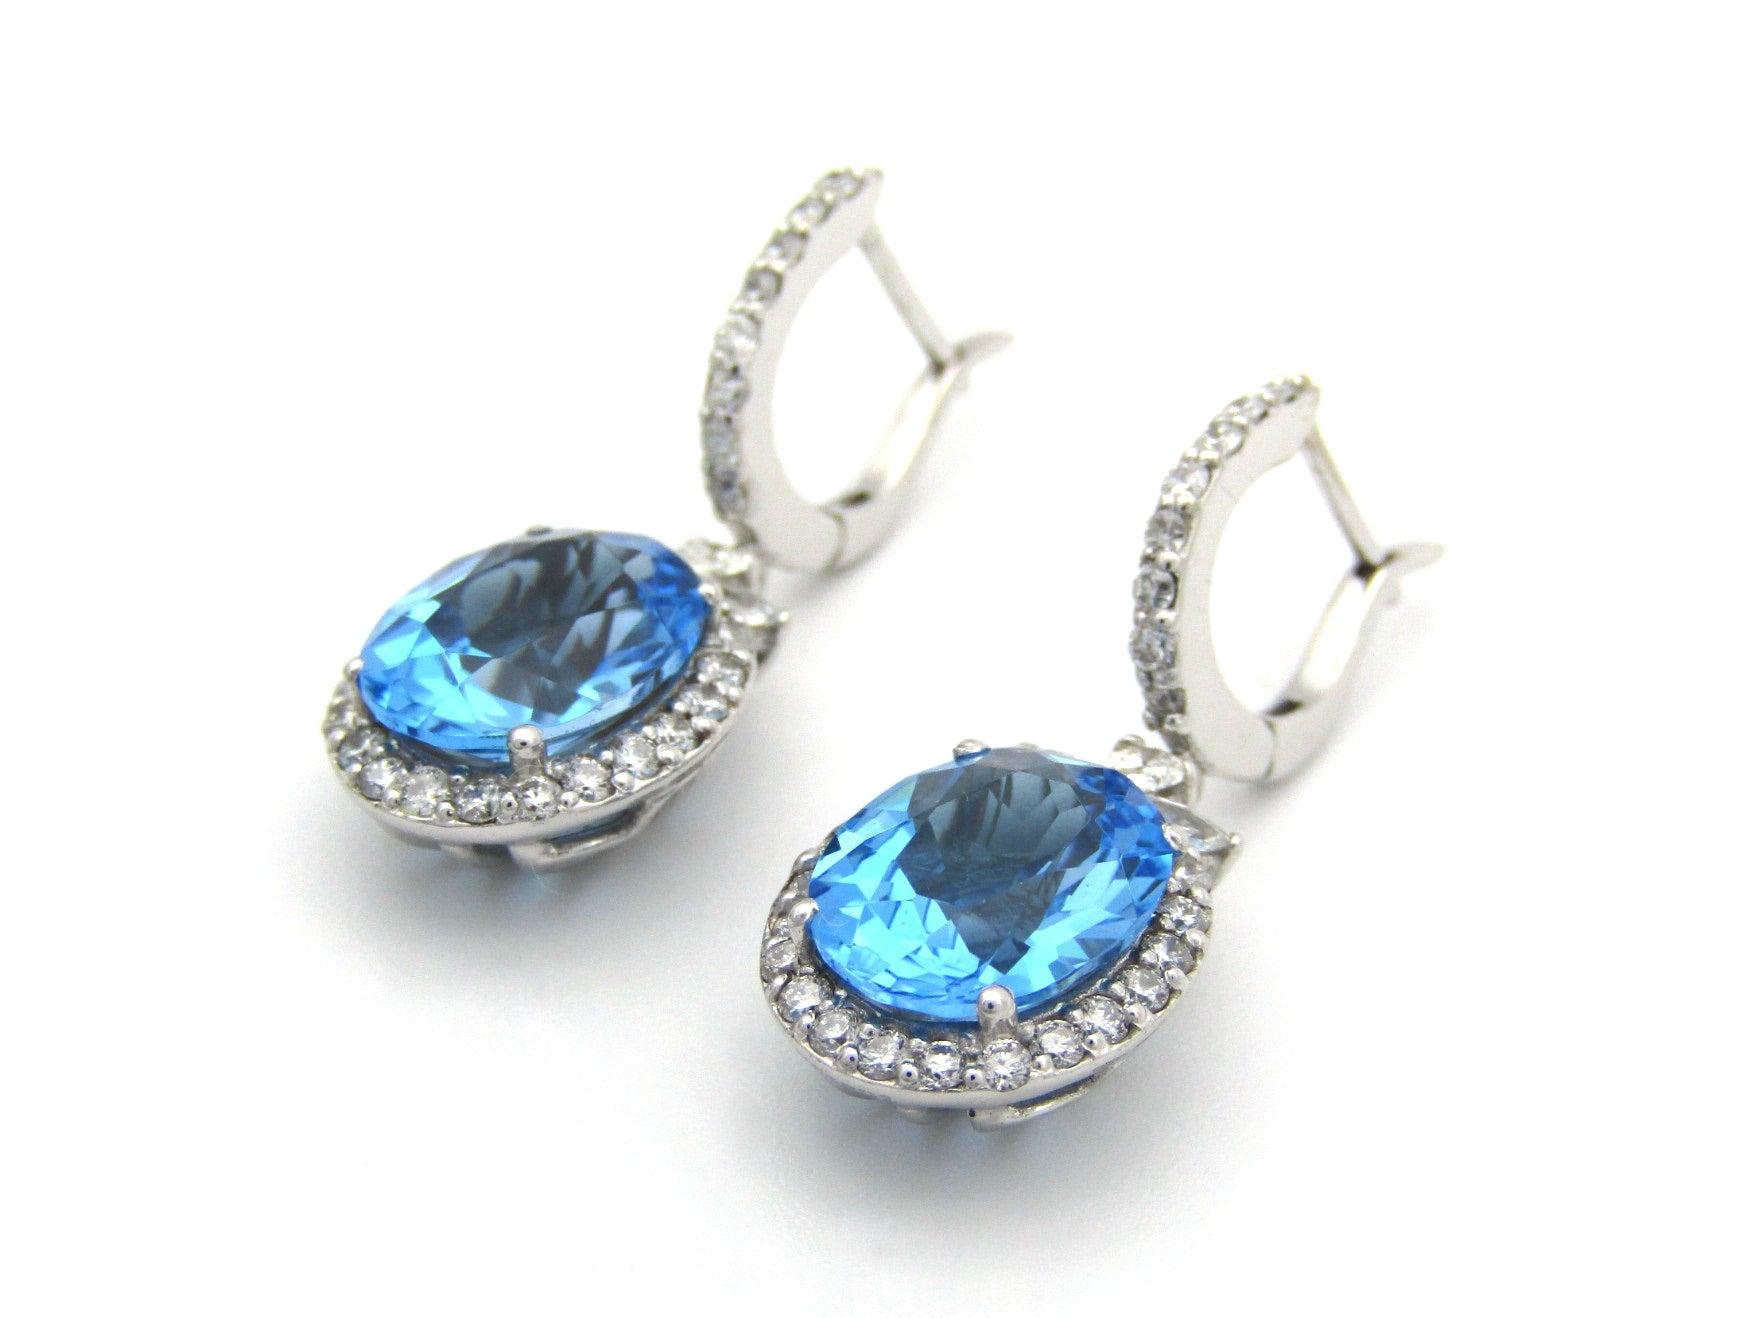 18K gold blue topaz and diamond earrings by Browns.